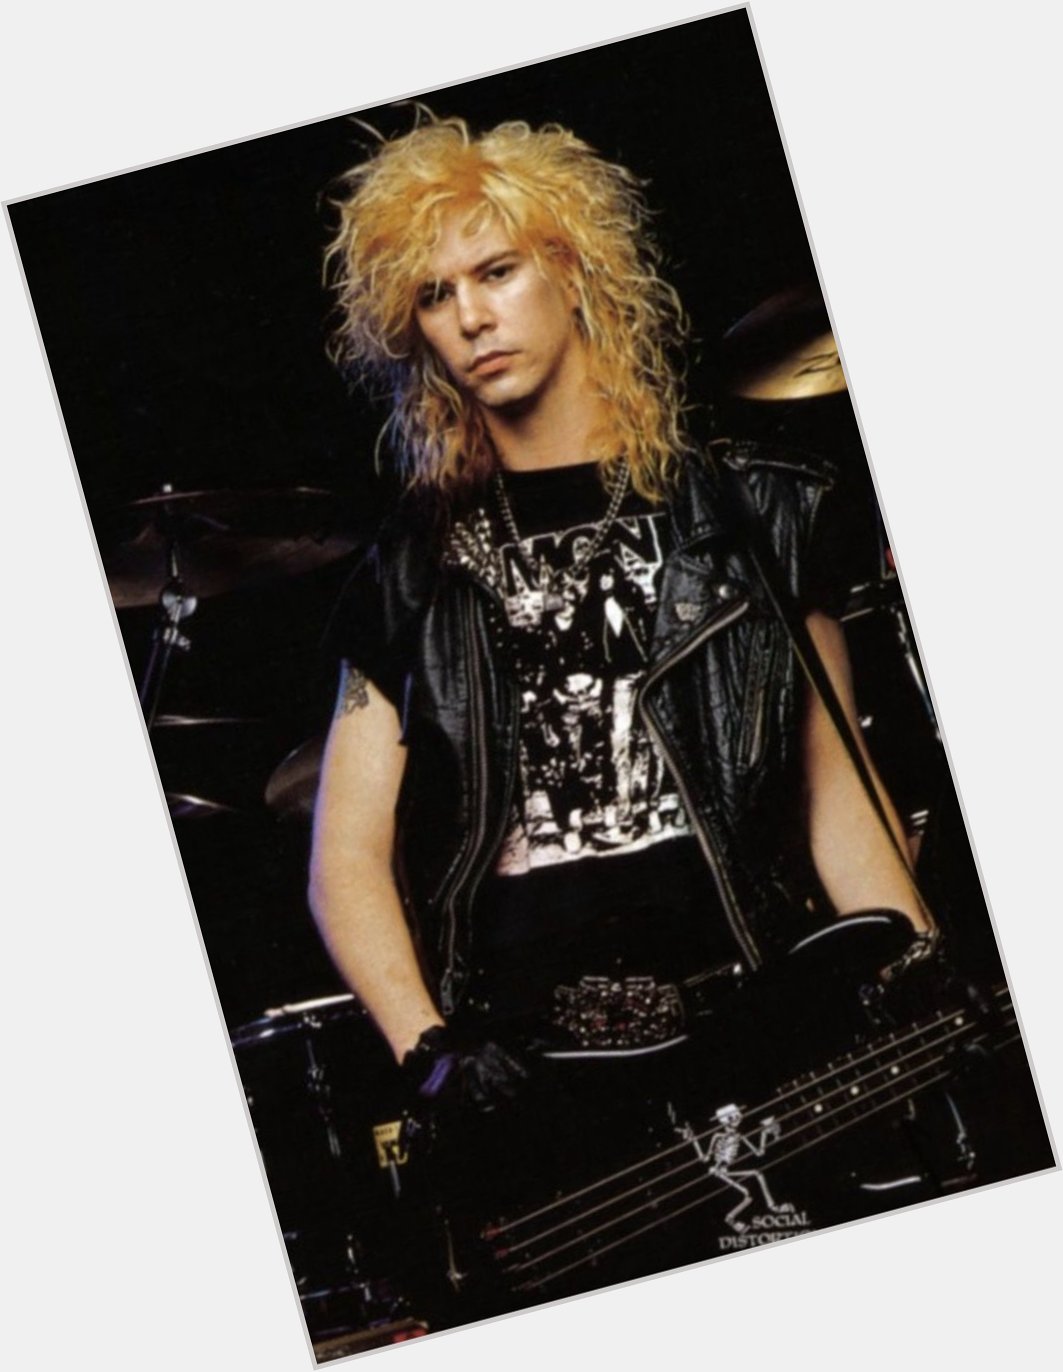 Happy Birthday to Guns \N Roses bassist Duff McKagan. He turns 57 today. 